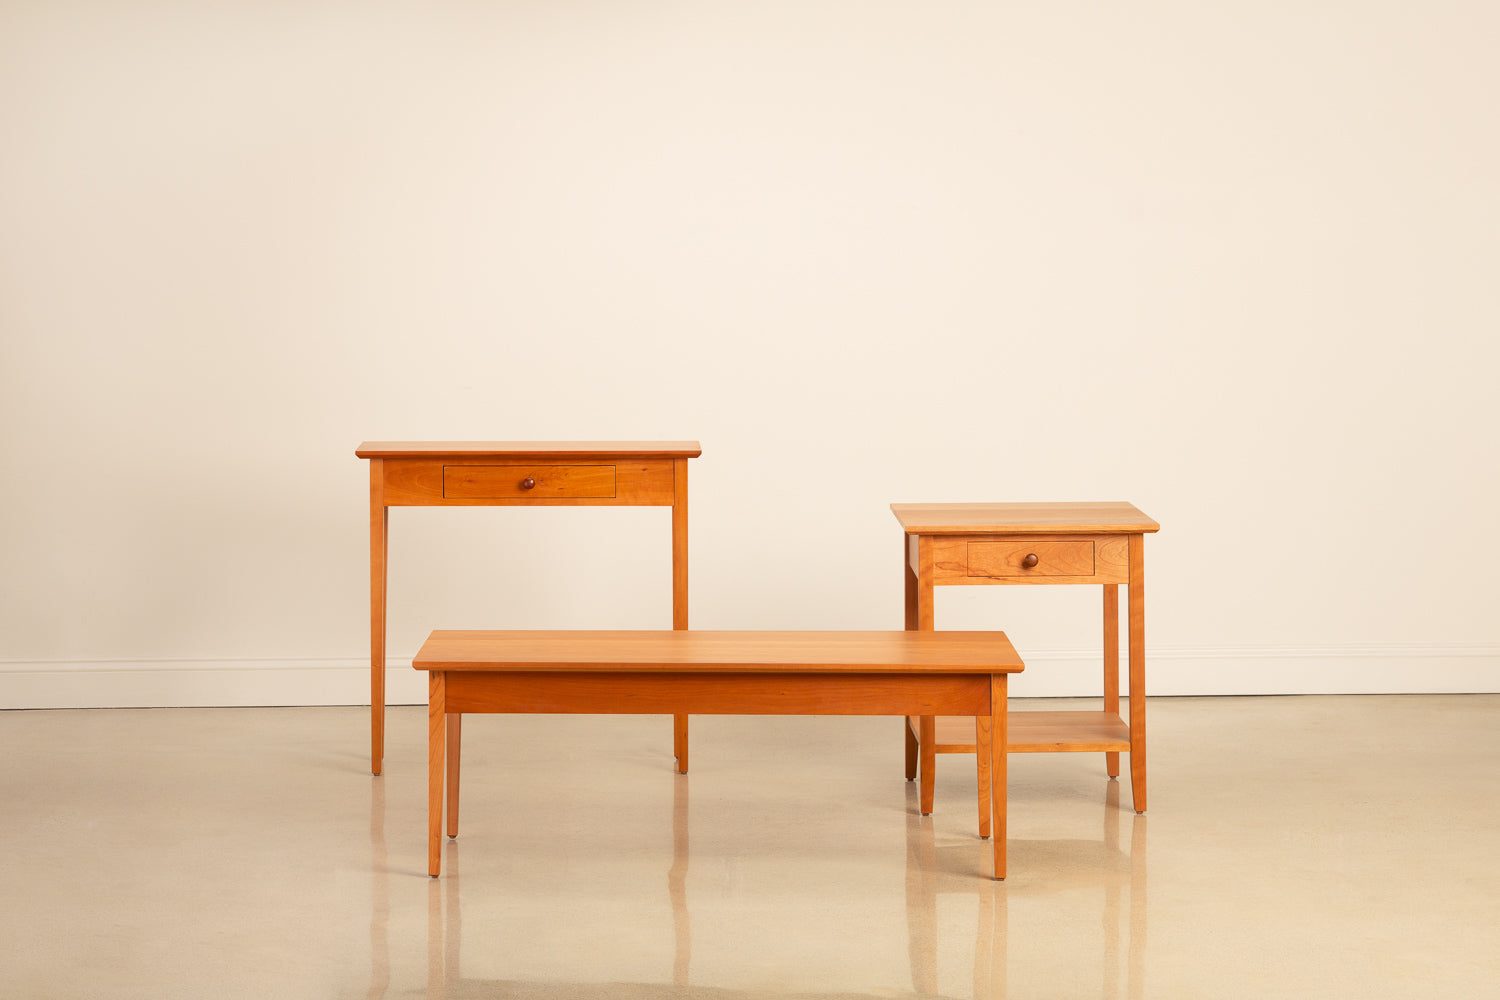 Group of three cherry wood occasional tables from Chilton Furniture in Maine